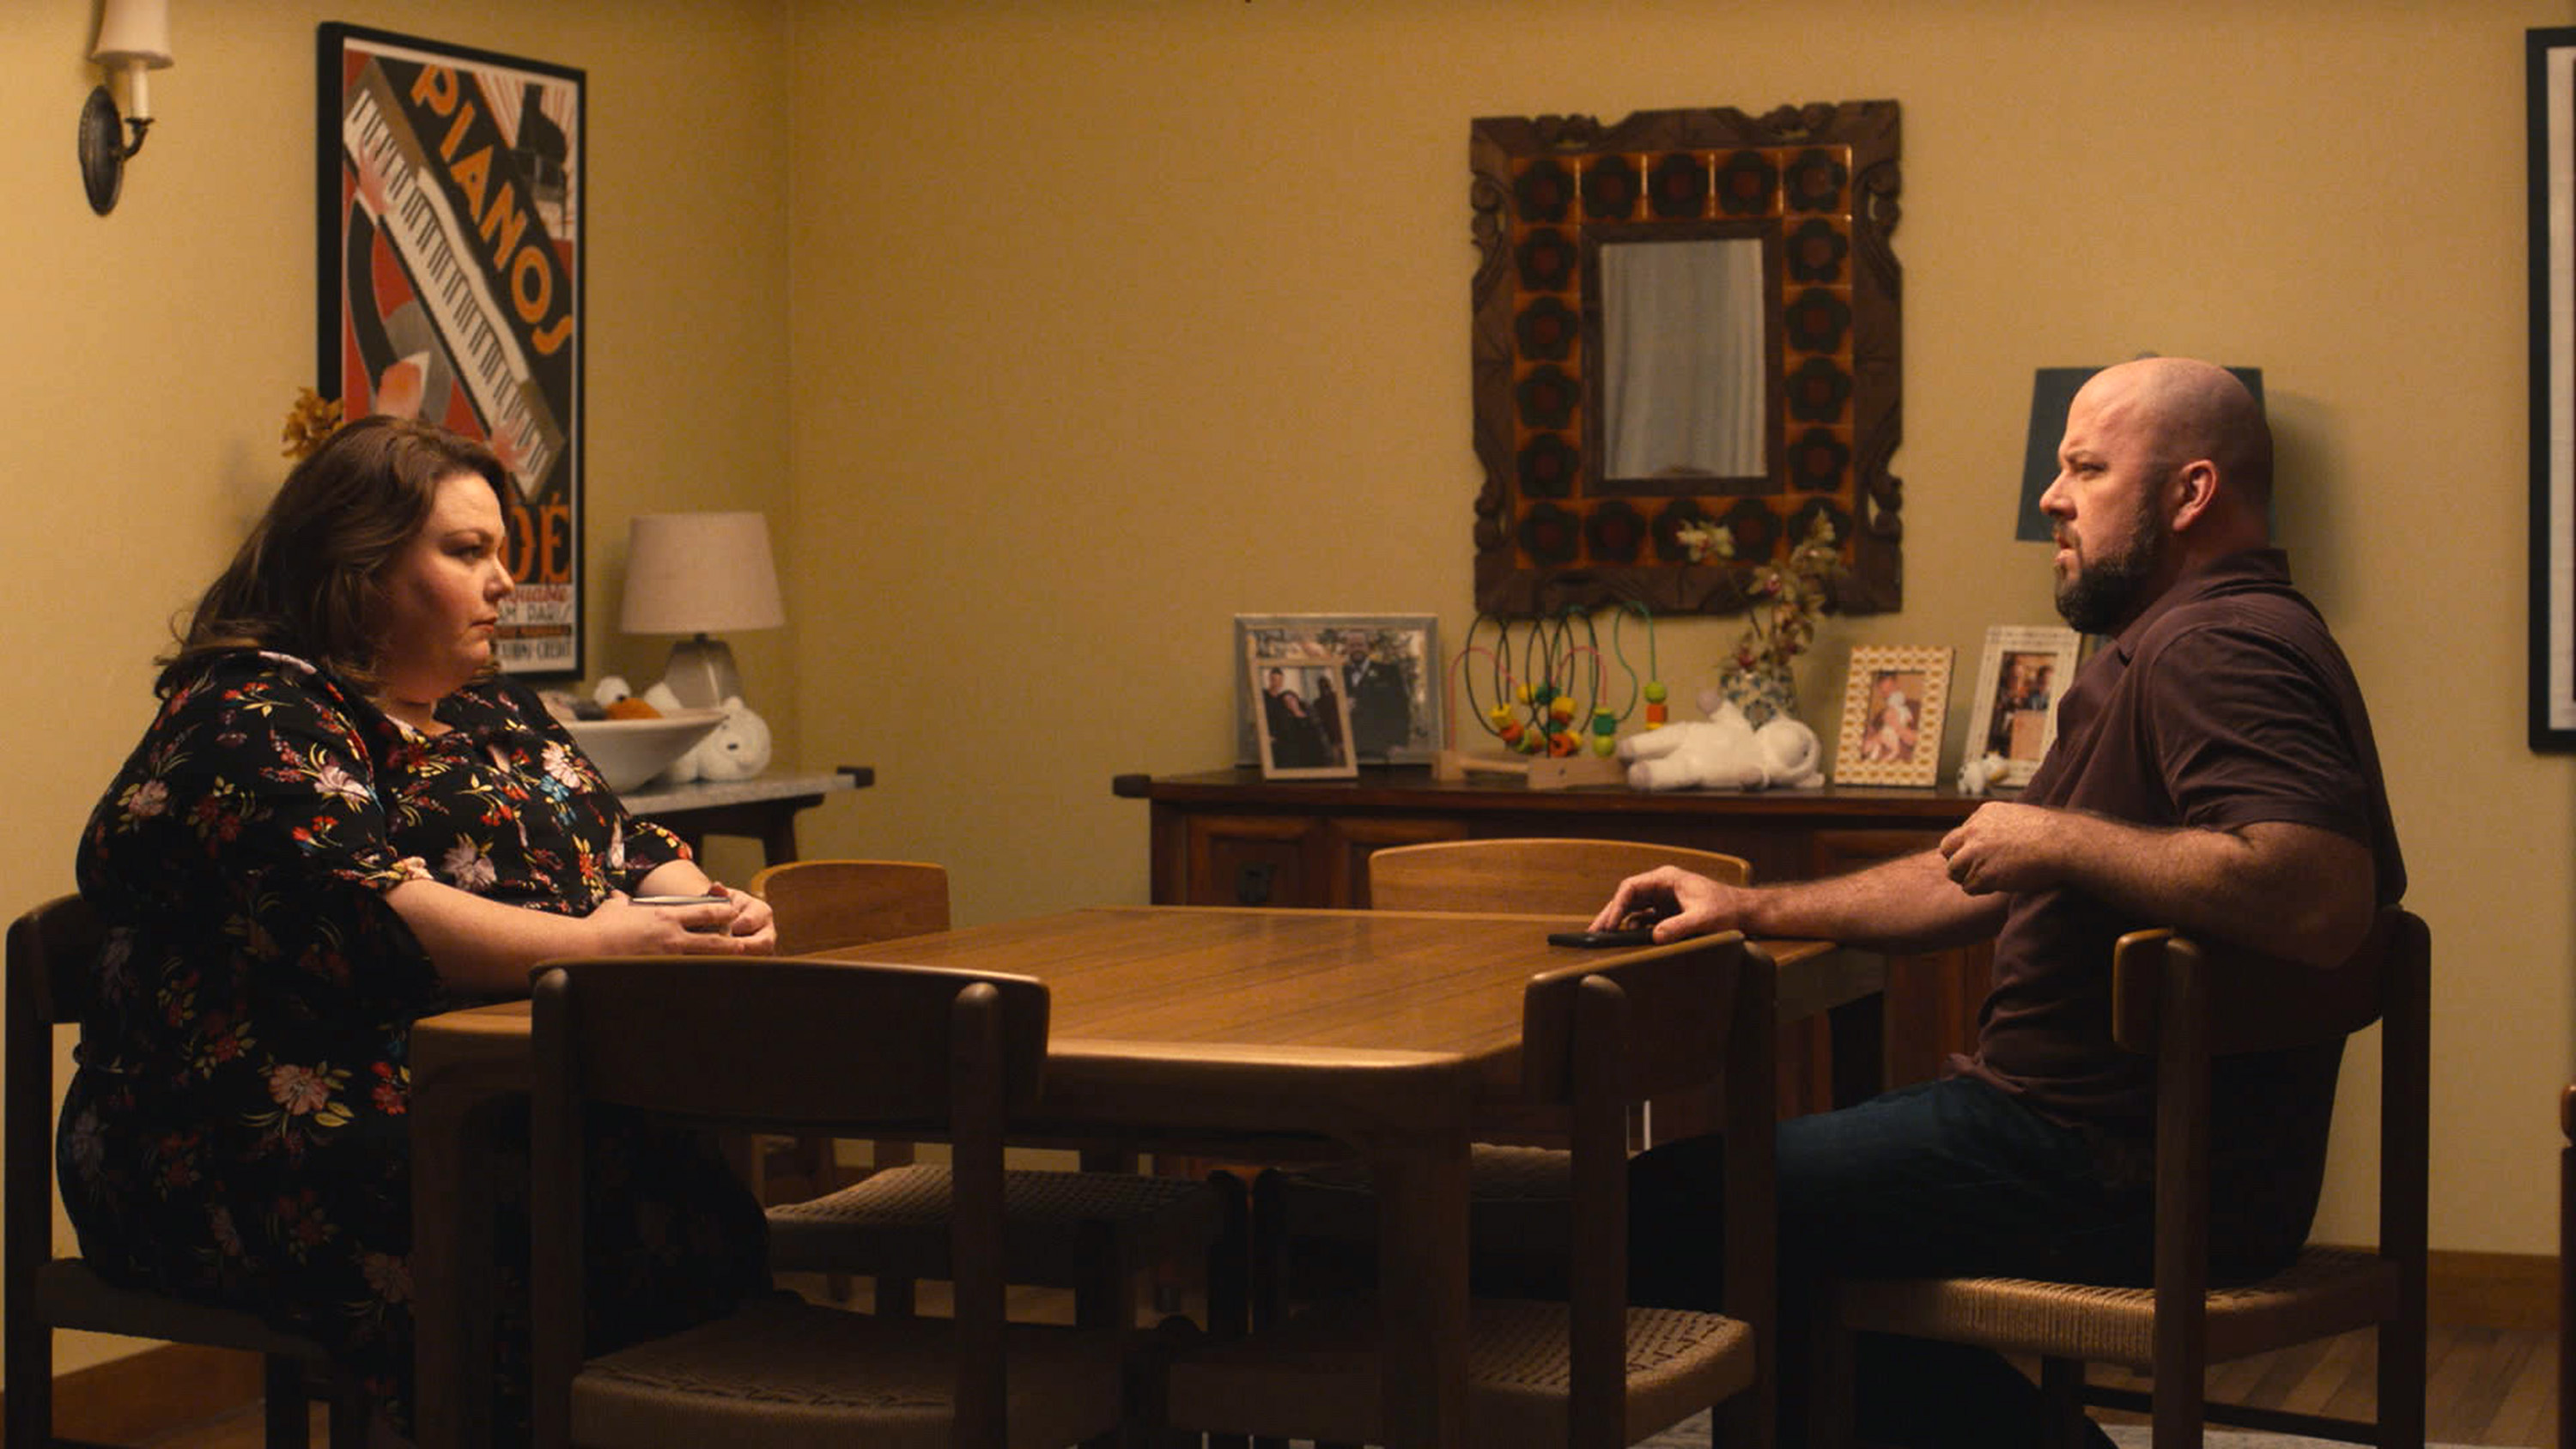 'This Is Us' stars Chrissy Metz as Kate Pearson and Chris Sullivan as Toby staring at each other from across a table.